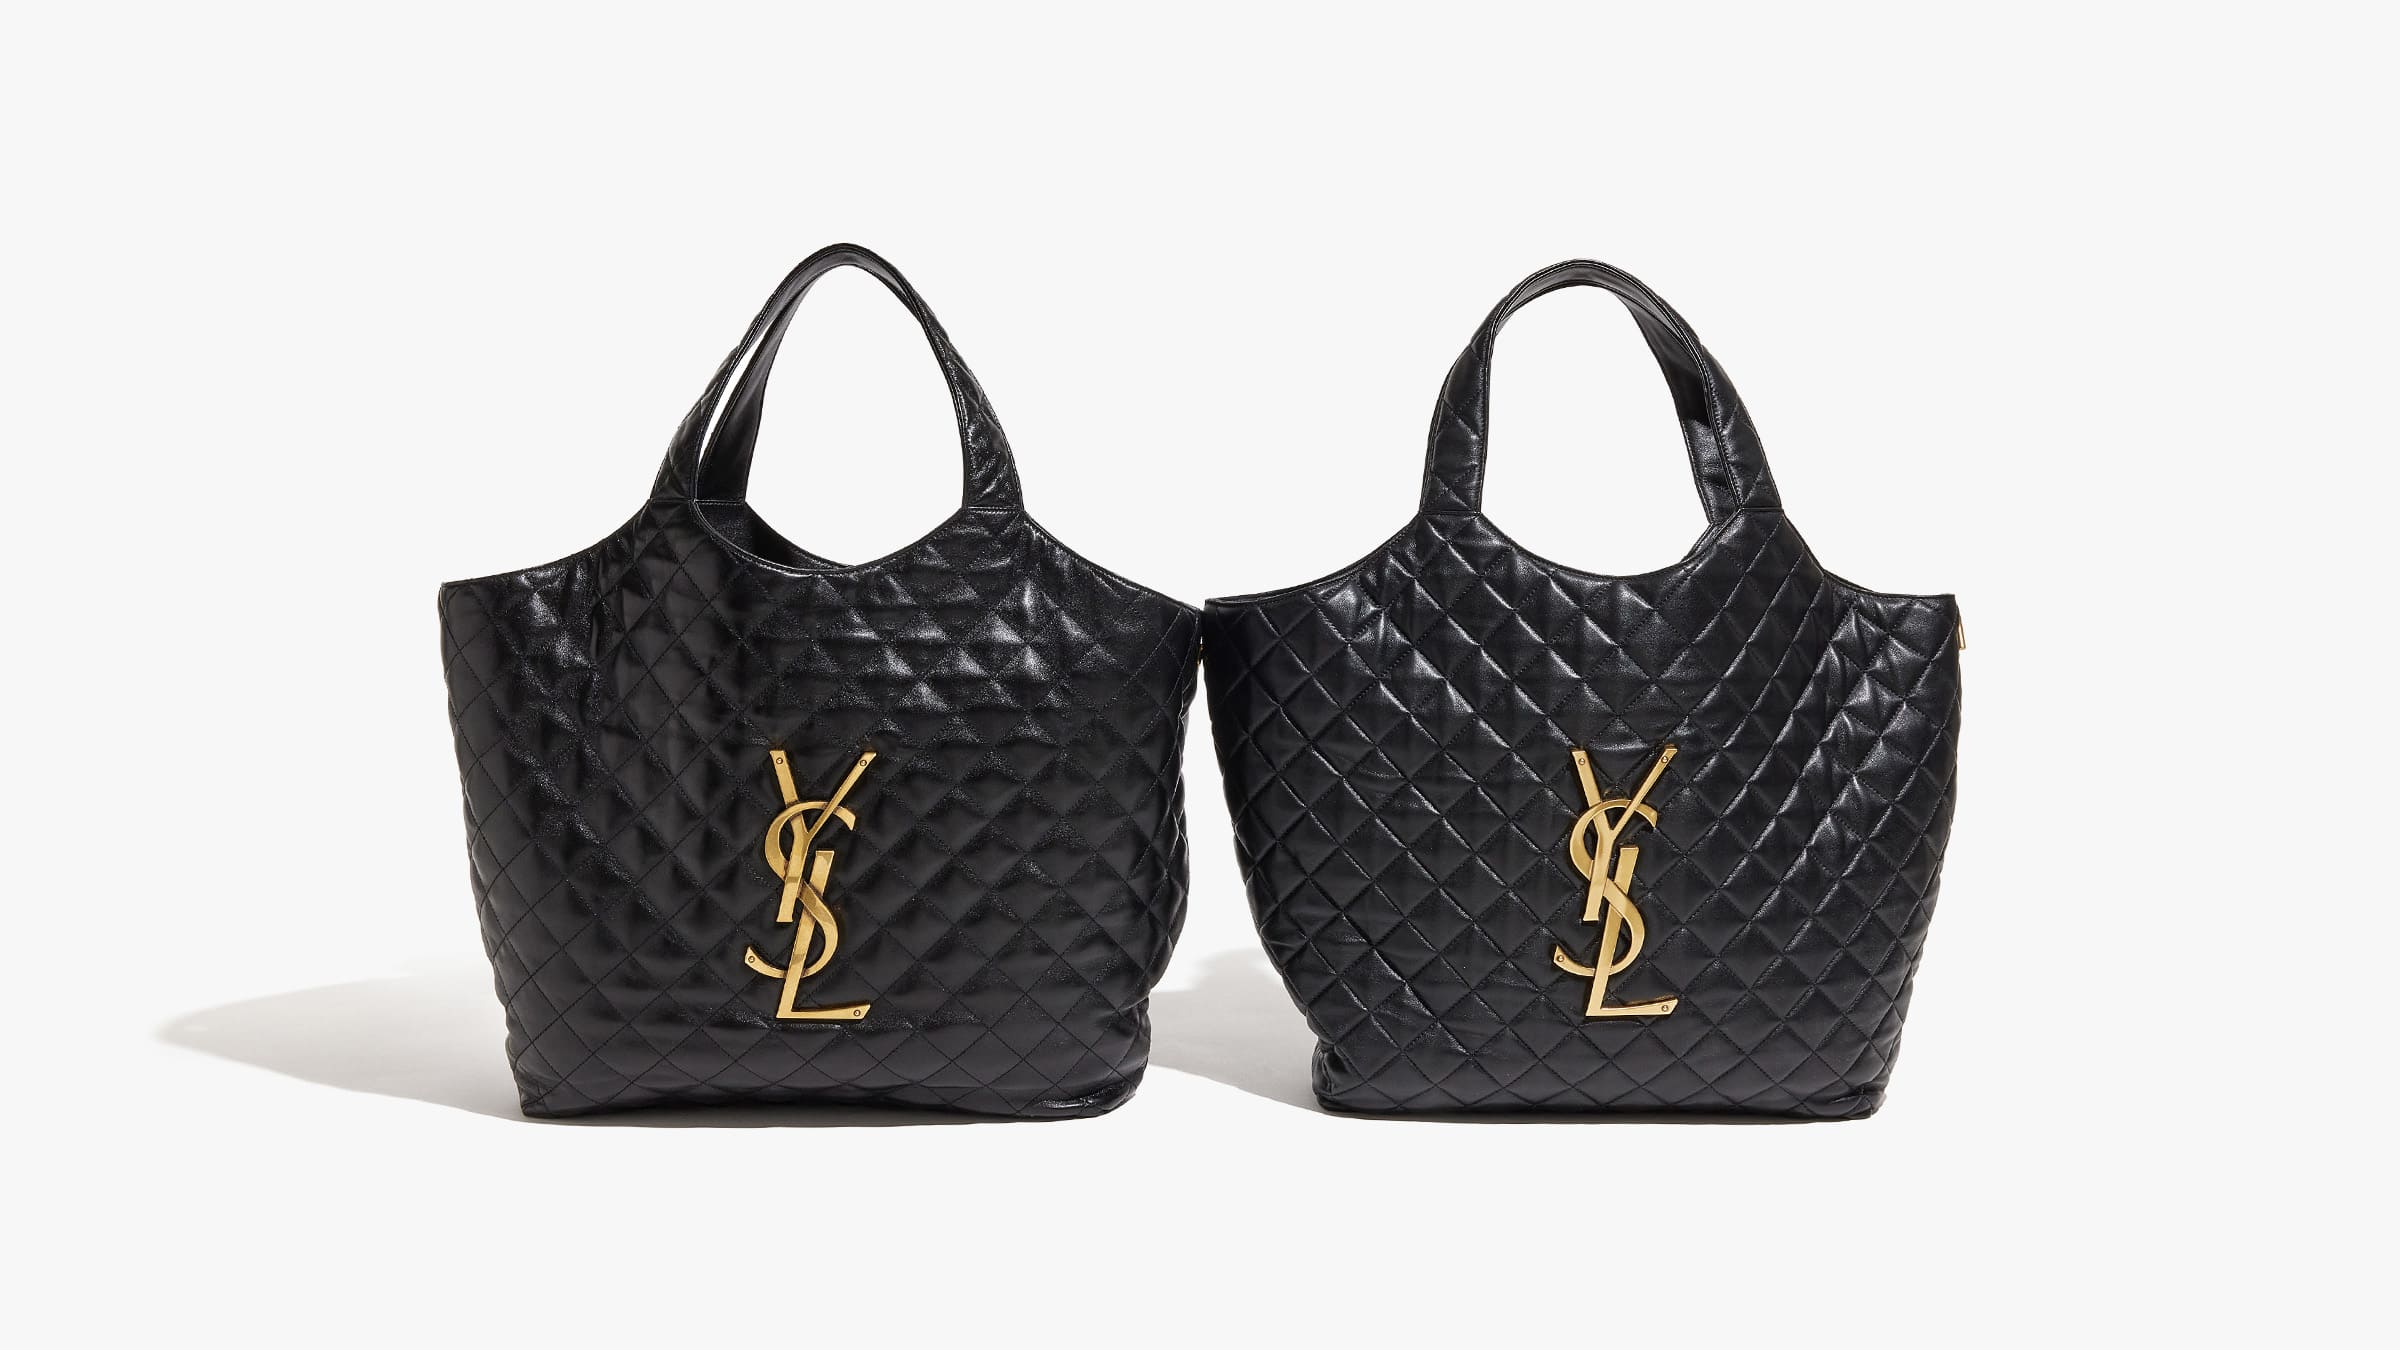 How to Authenticate the Saint Laurent Icare Maxi Shopping Tote Bag ...